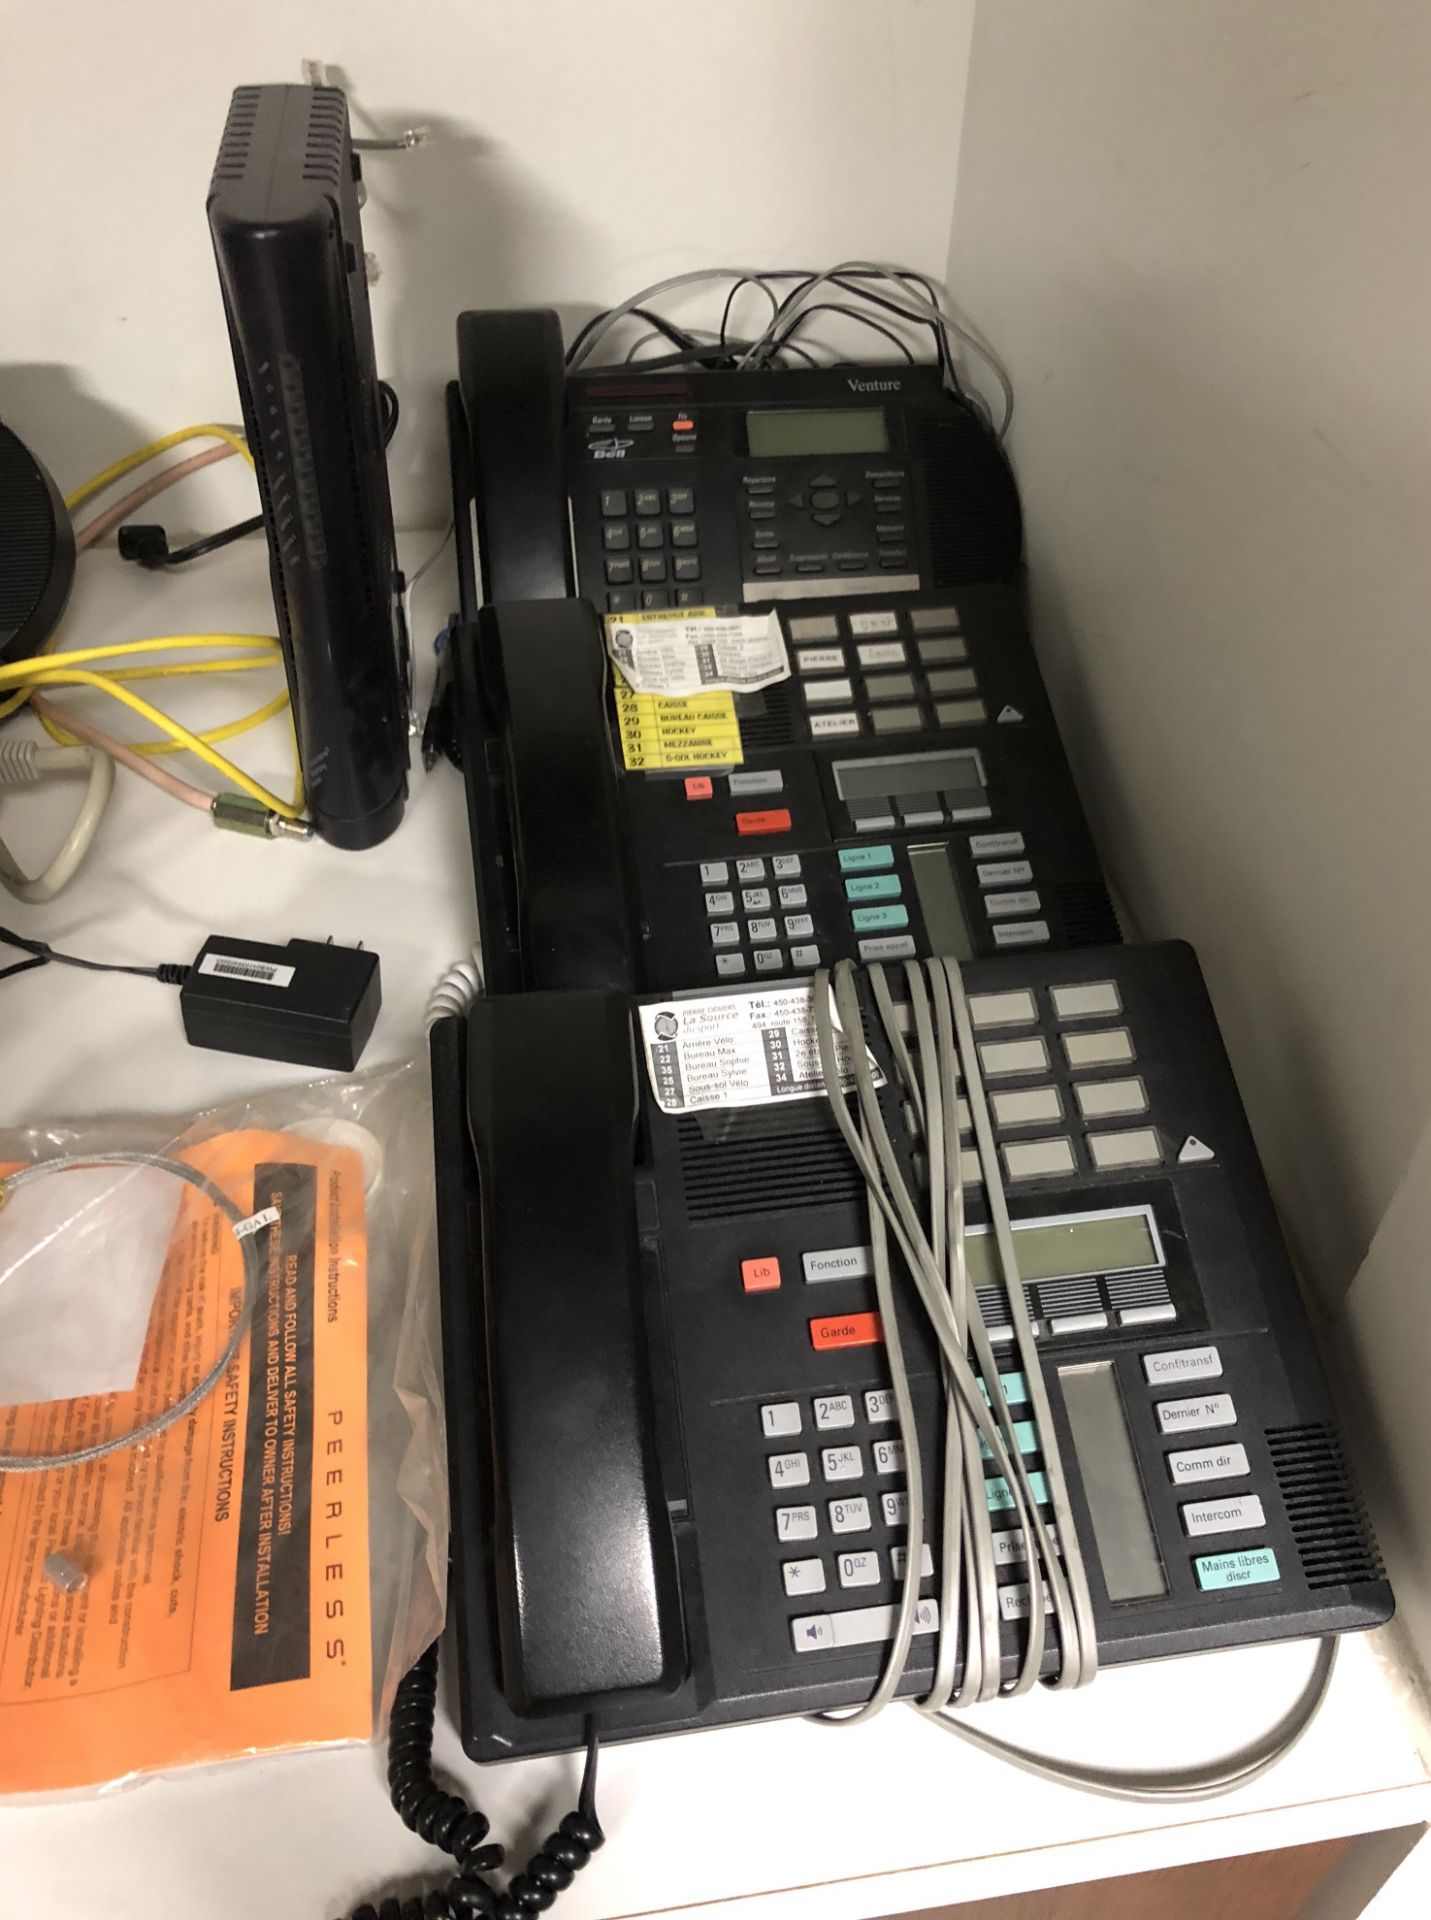 LOT OF OFFICE PHONES AND SMALL ROUTER, PLUS MISC ITEMS - Image 2 of 3